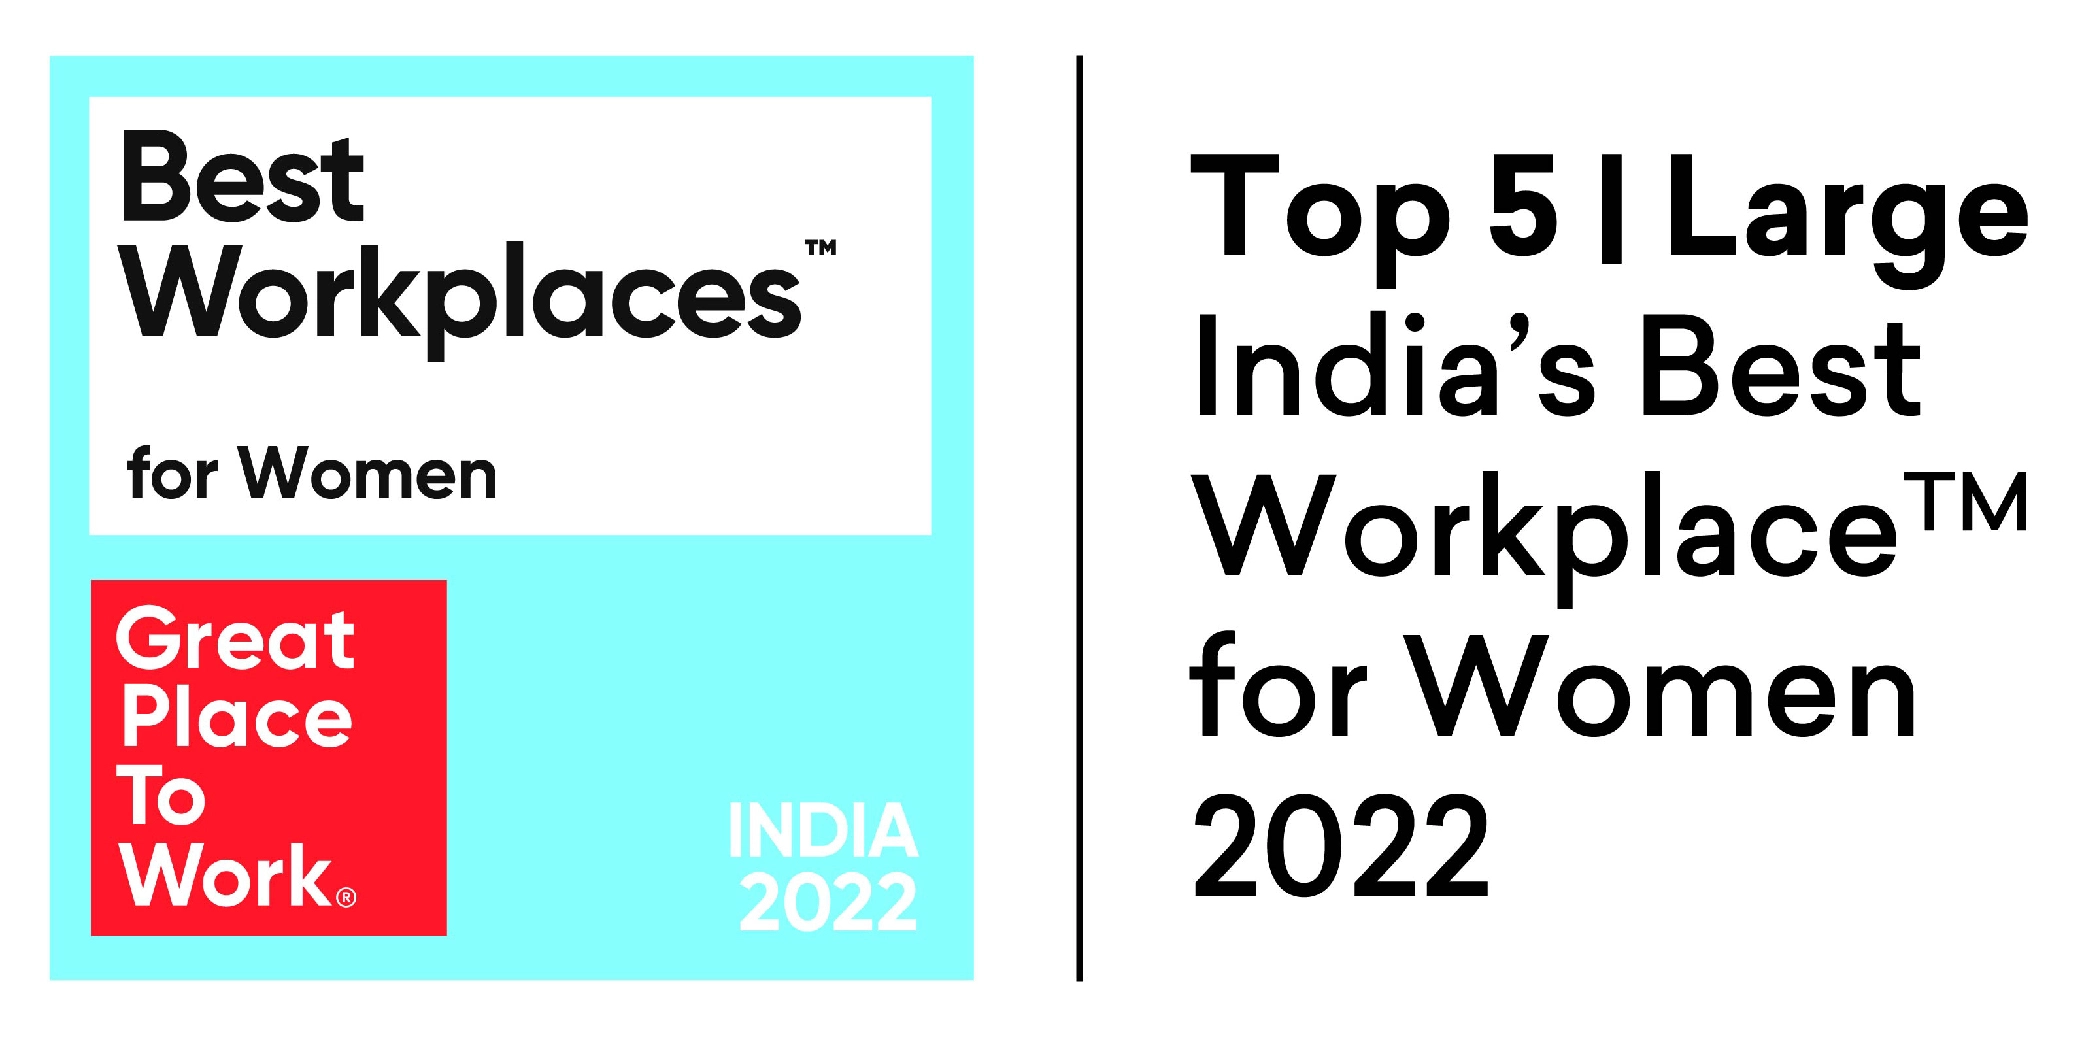 GPTW - Top 5 Large - India's Best Workplace for Women 2022